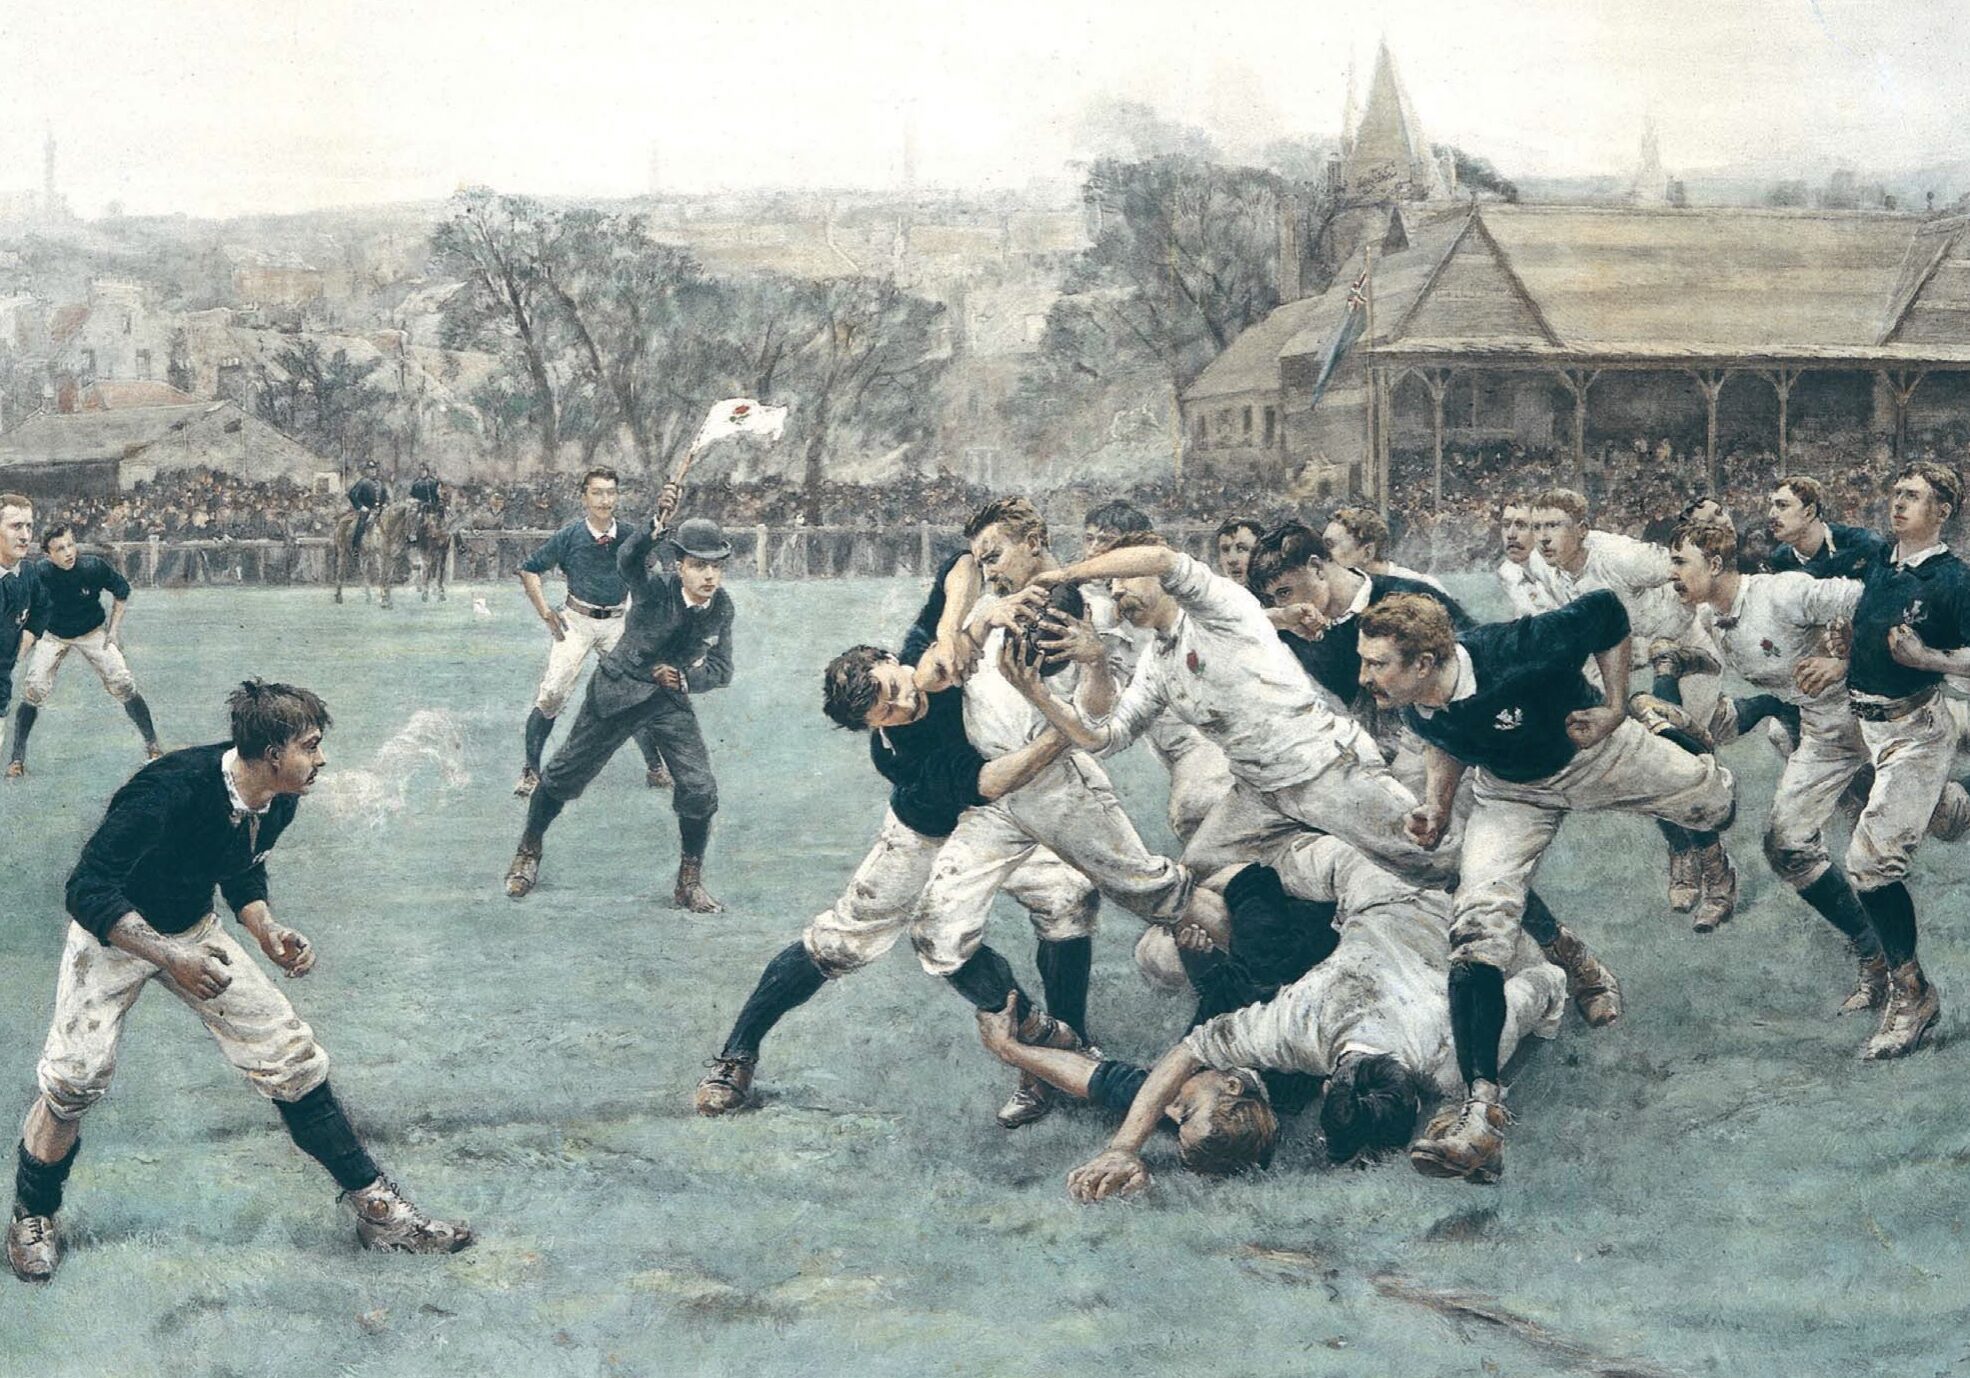 The Auld Enemies quickly developed a deep rivalry after their first rugby clash in 1871